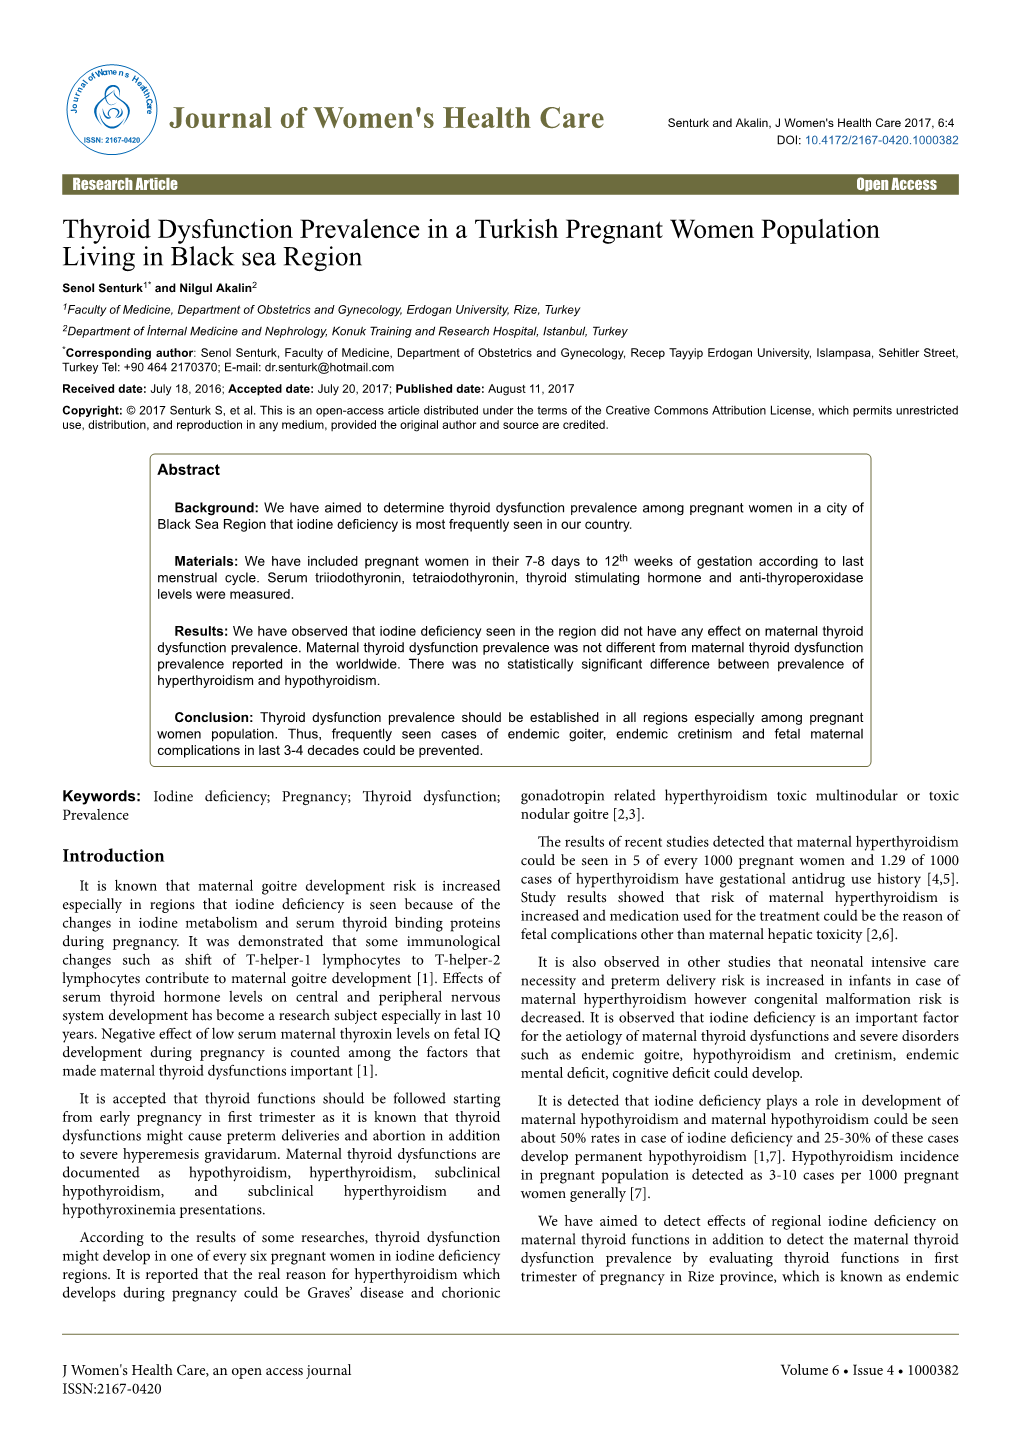 Thyroid Dysfunction Prevalence in a Turkish Pregnant Women